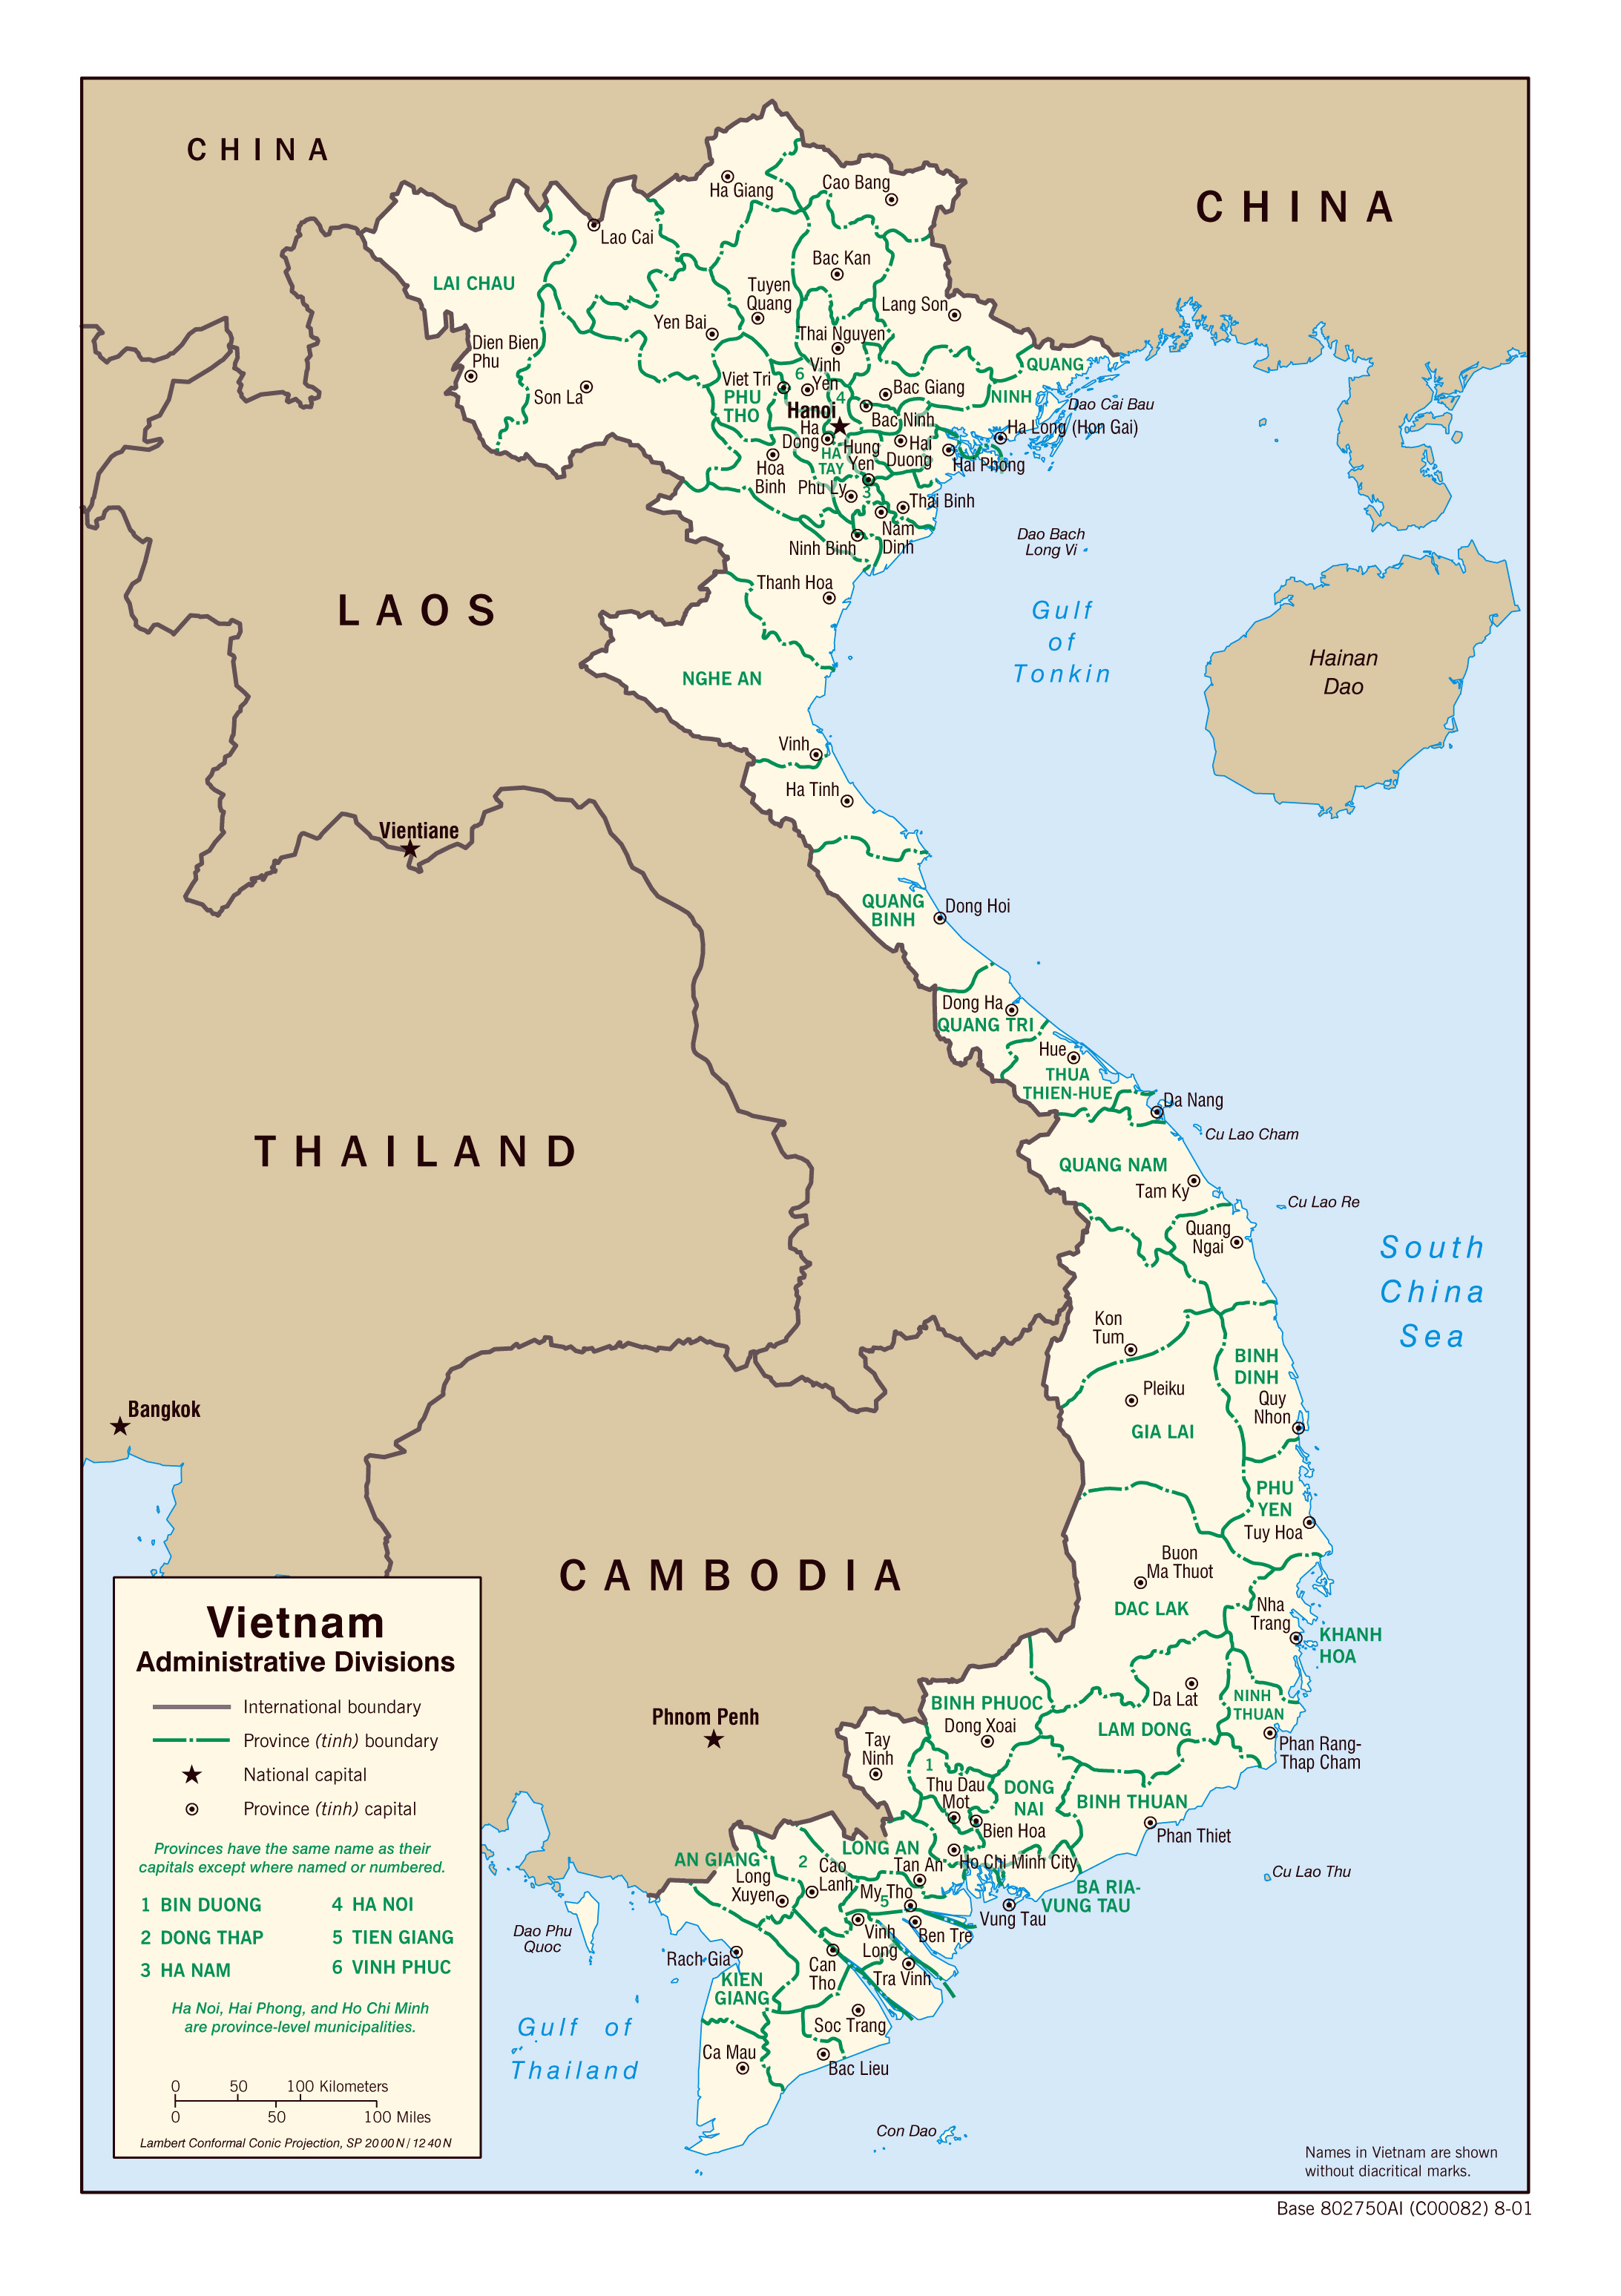 Large Administrative Divisions Map Of Vietnam - 2001 C9D